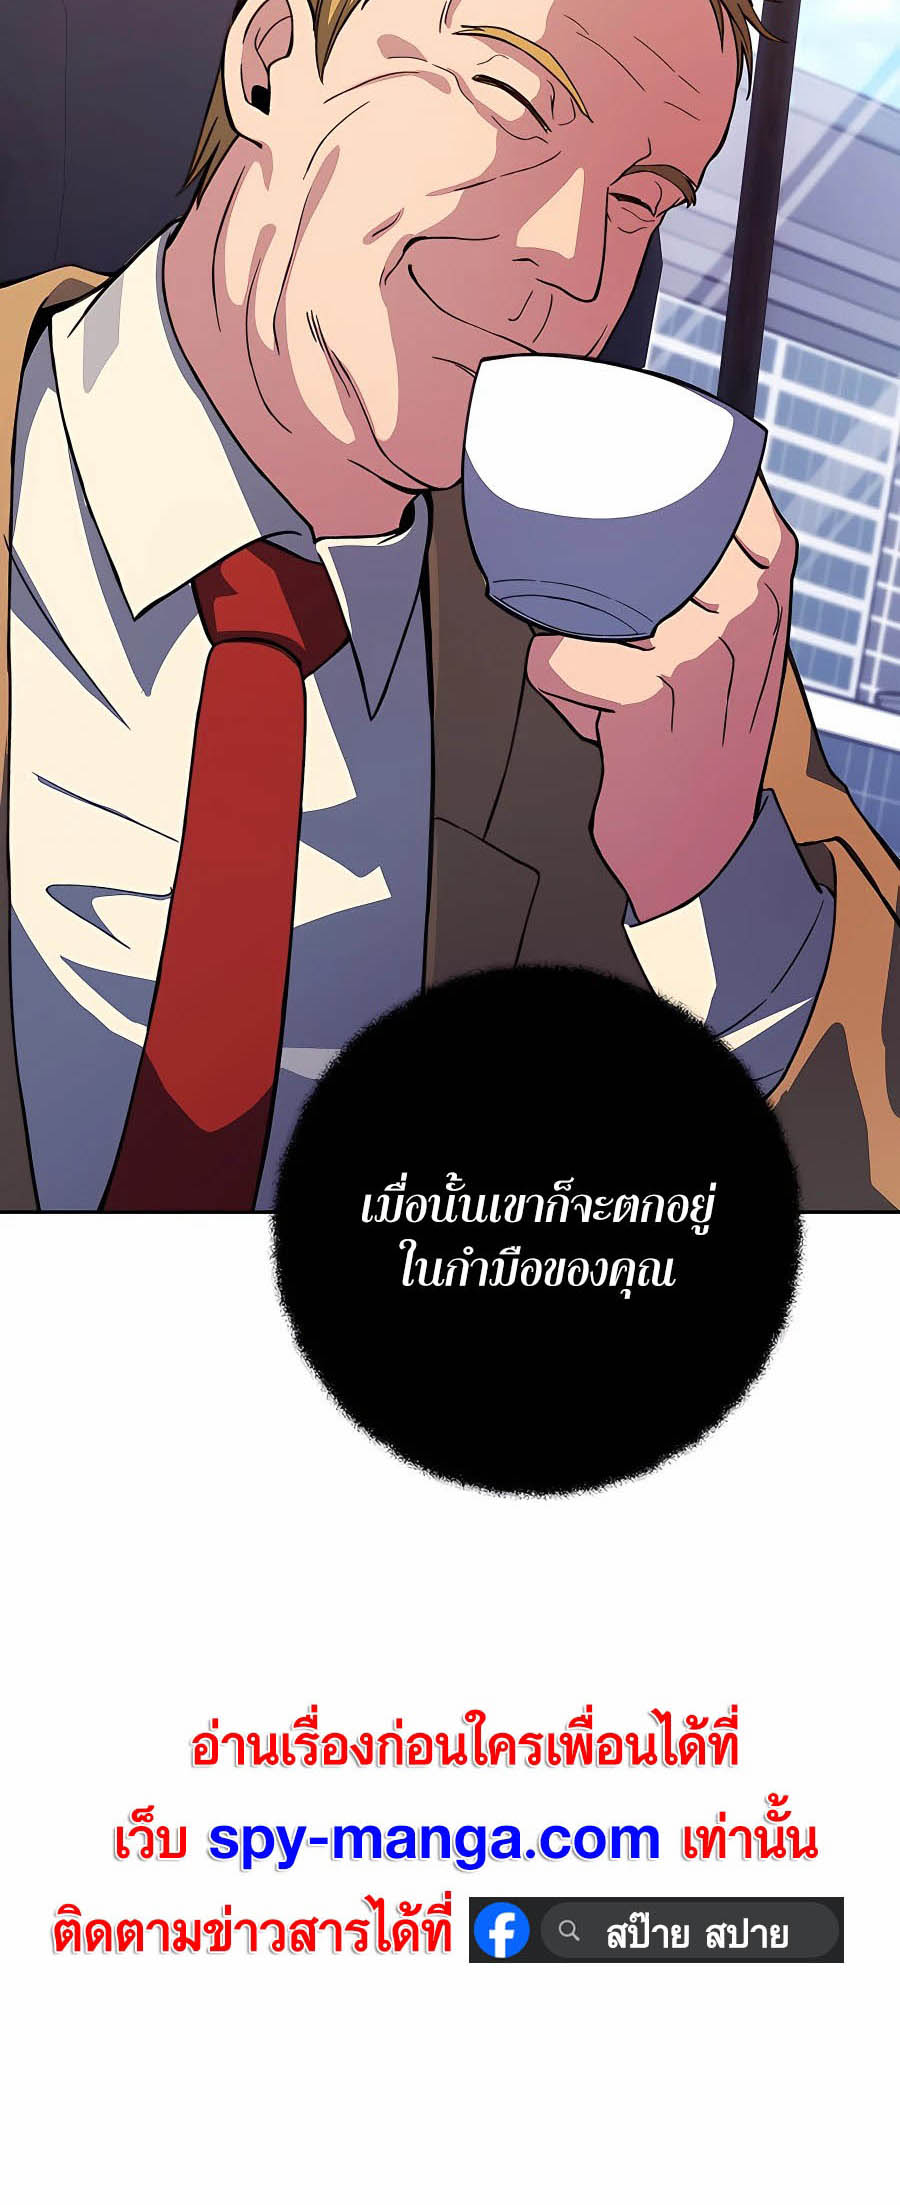 à¸­à¹ˆà¸²à¸™à¸¡à¸±à¸™à¸®à¸§à¸² à¹€à¸£à¸·à¹ˆà¸­à¸‡ The Part Time Land of the Gods 56 22